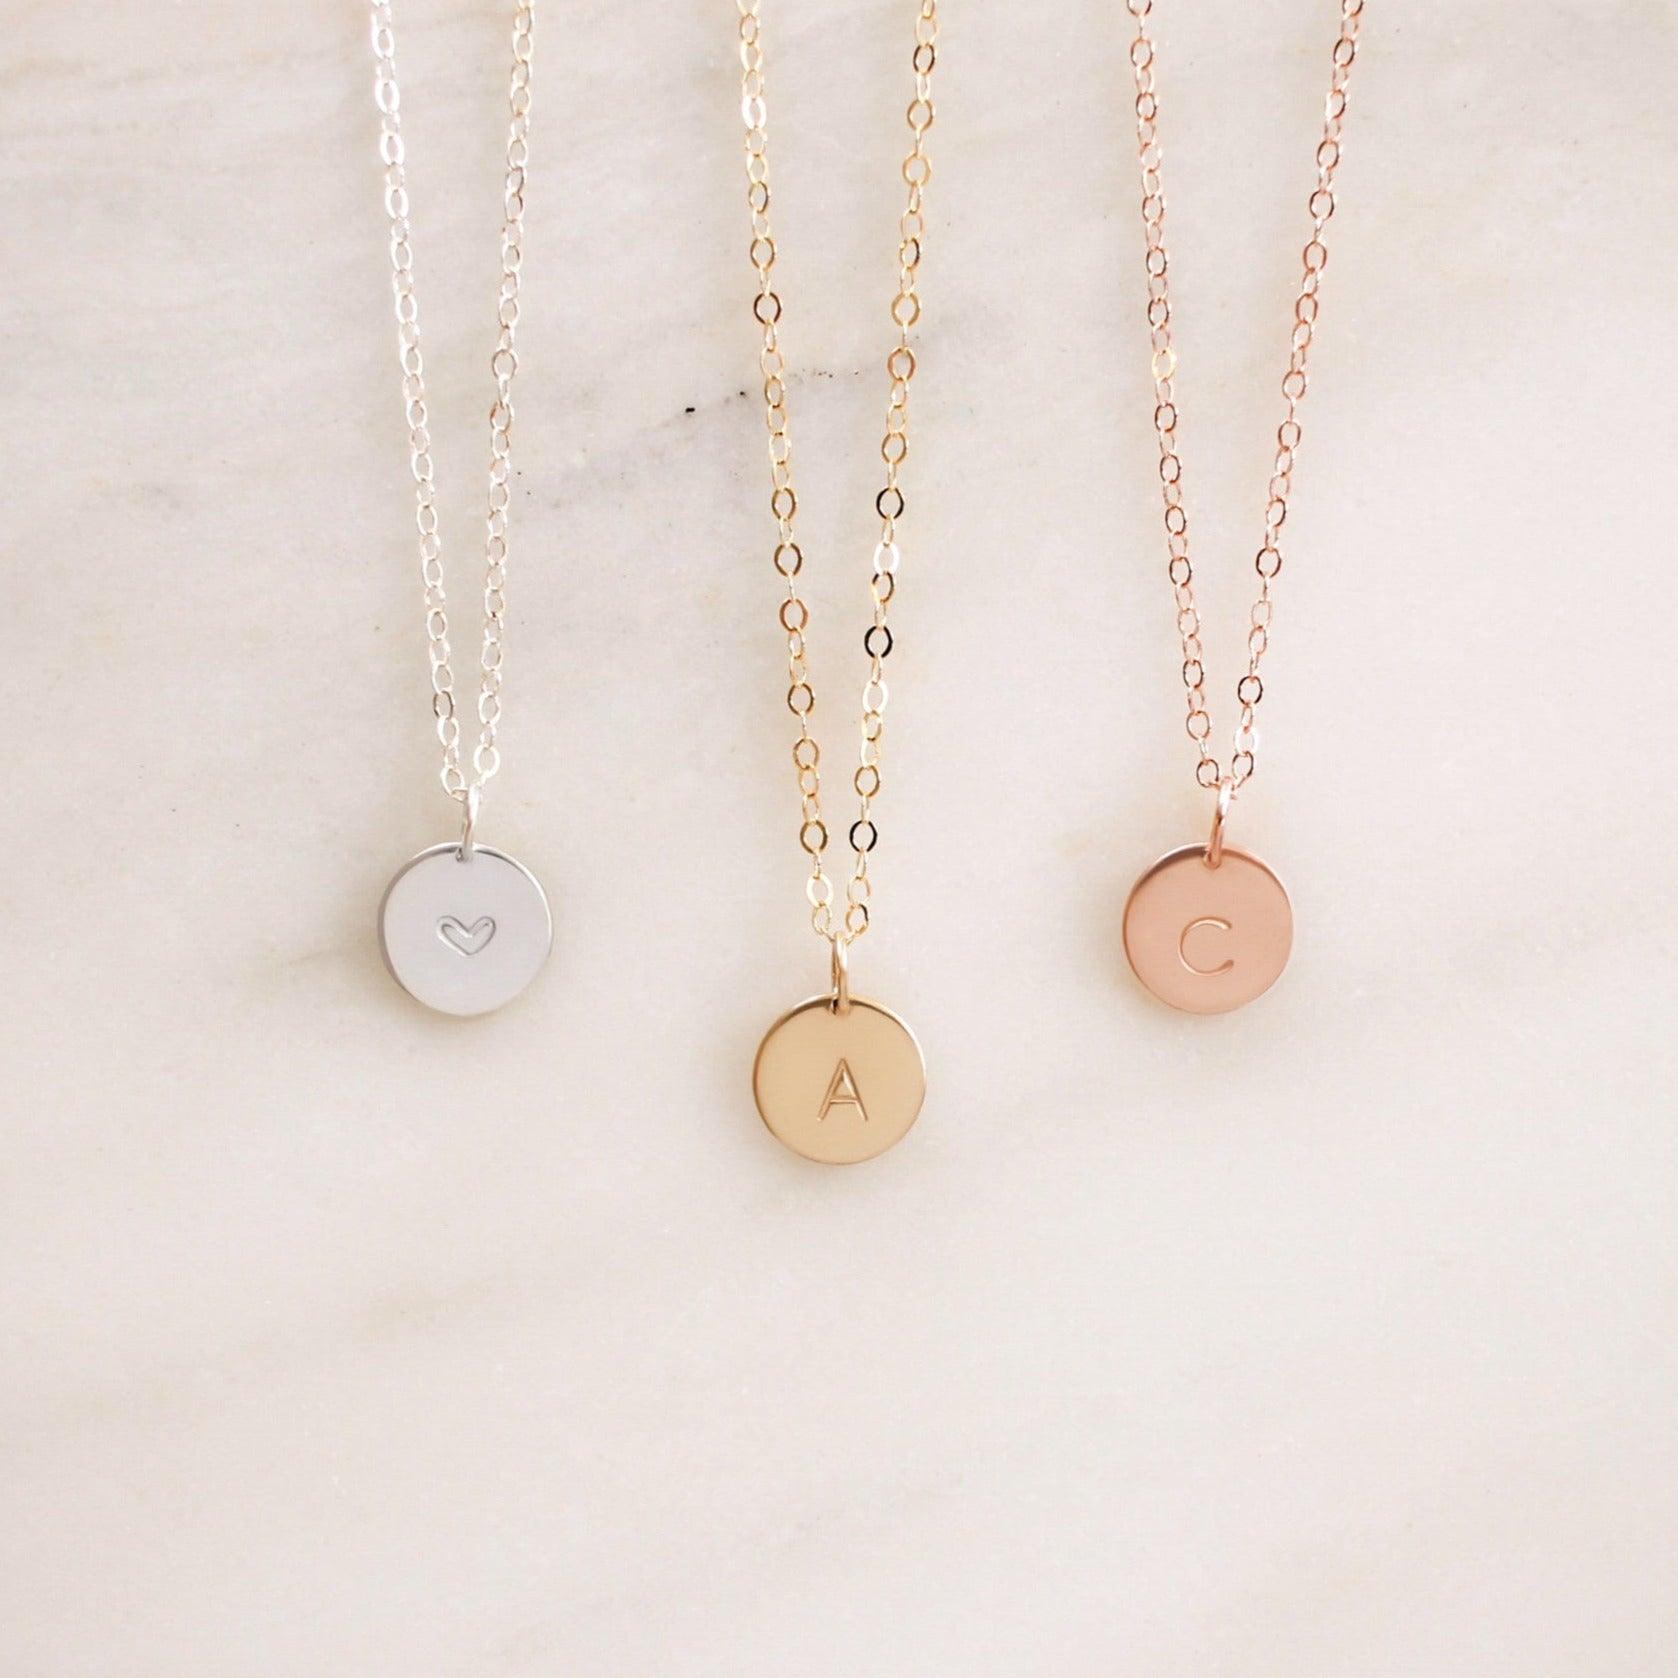 Original Initial Necklace - Nolia Jewelry - Meaningful + Sustainably Handcrafted Jewelry